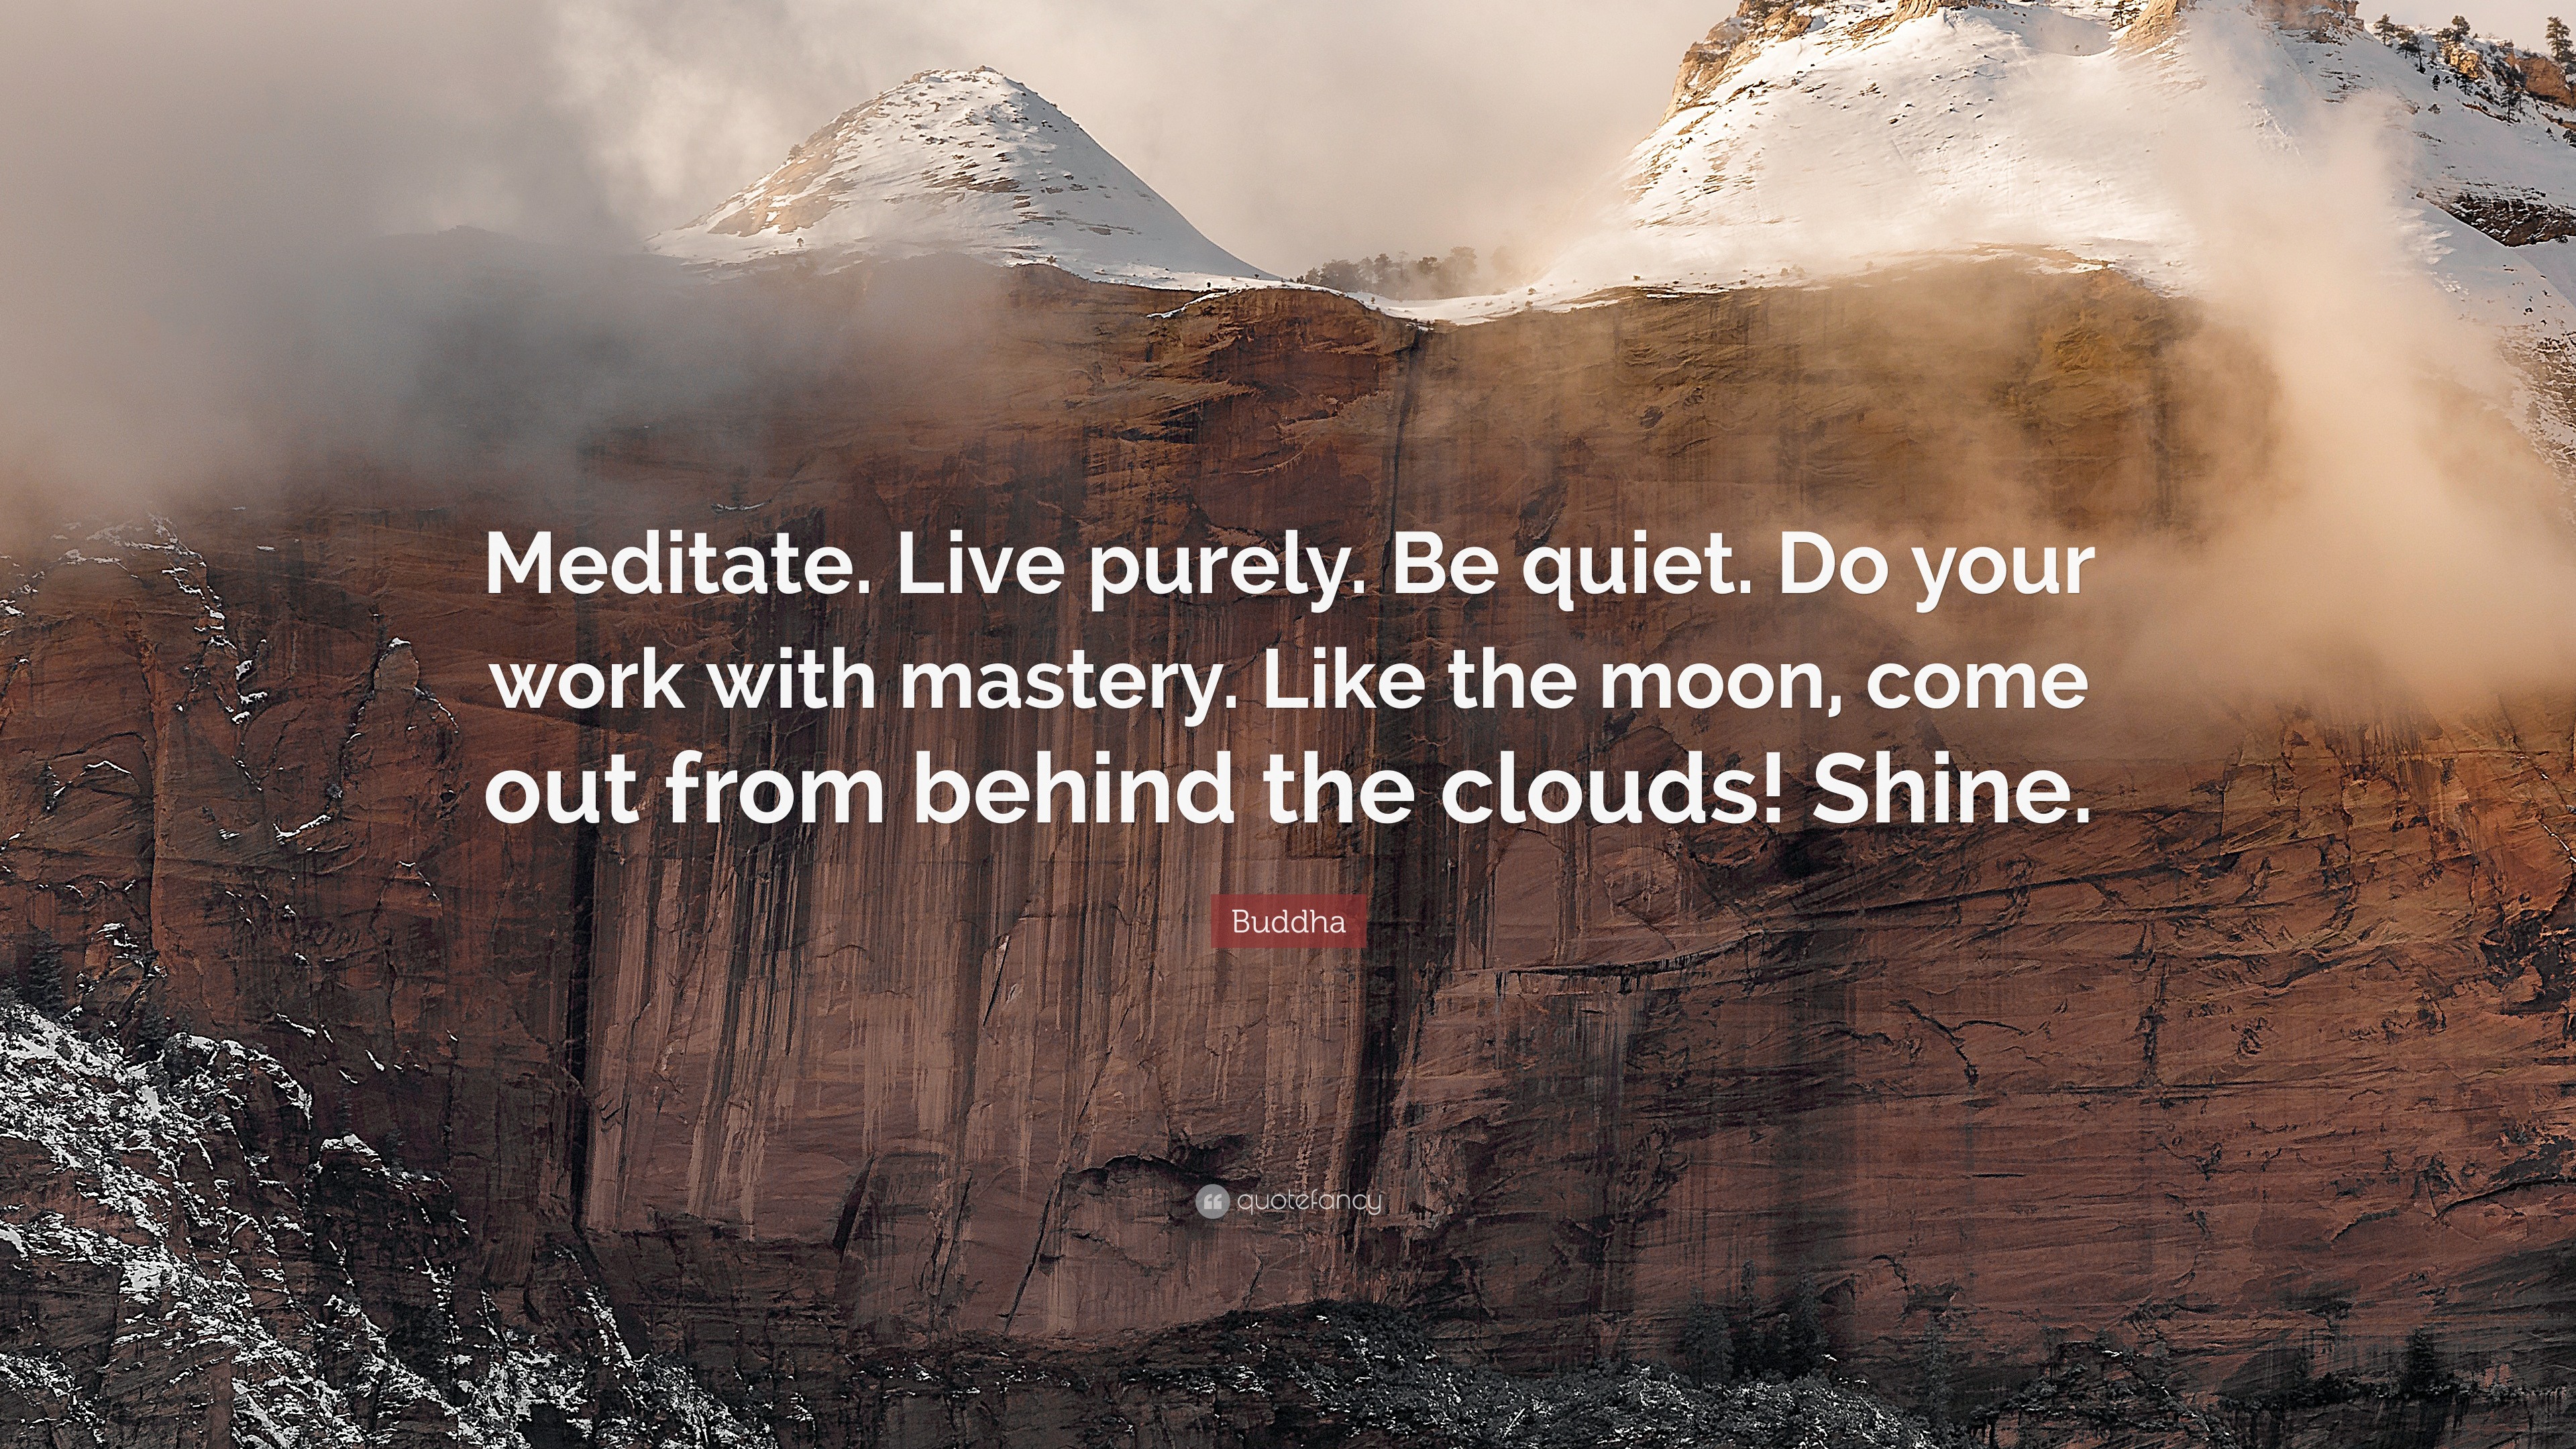 Buddha Quote: “Meditate. Live purely. Be quiet. Do your work with